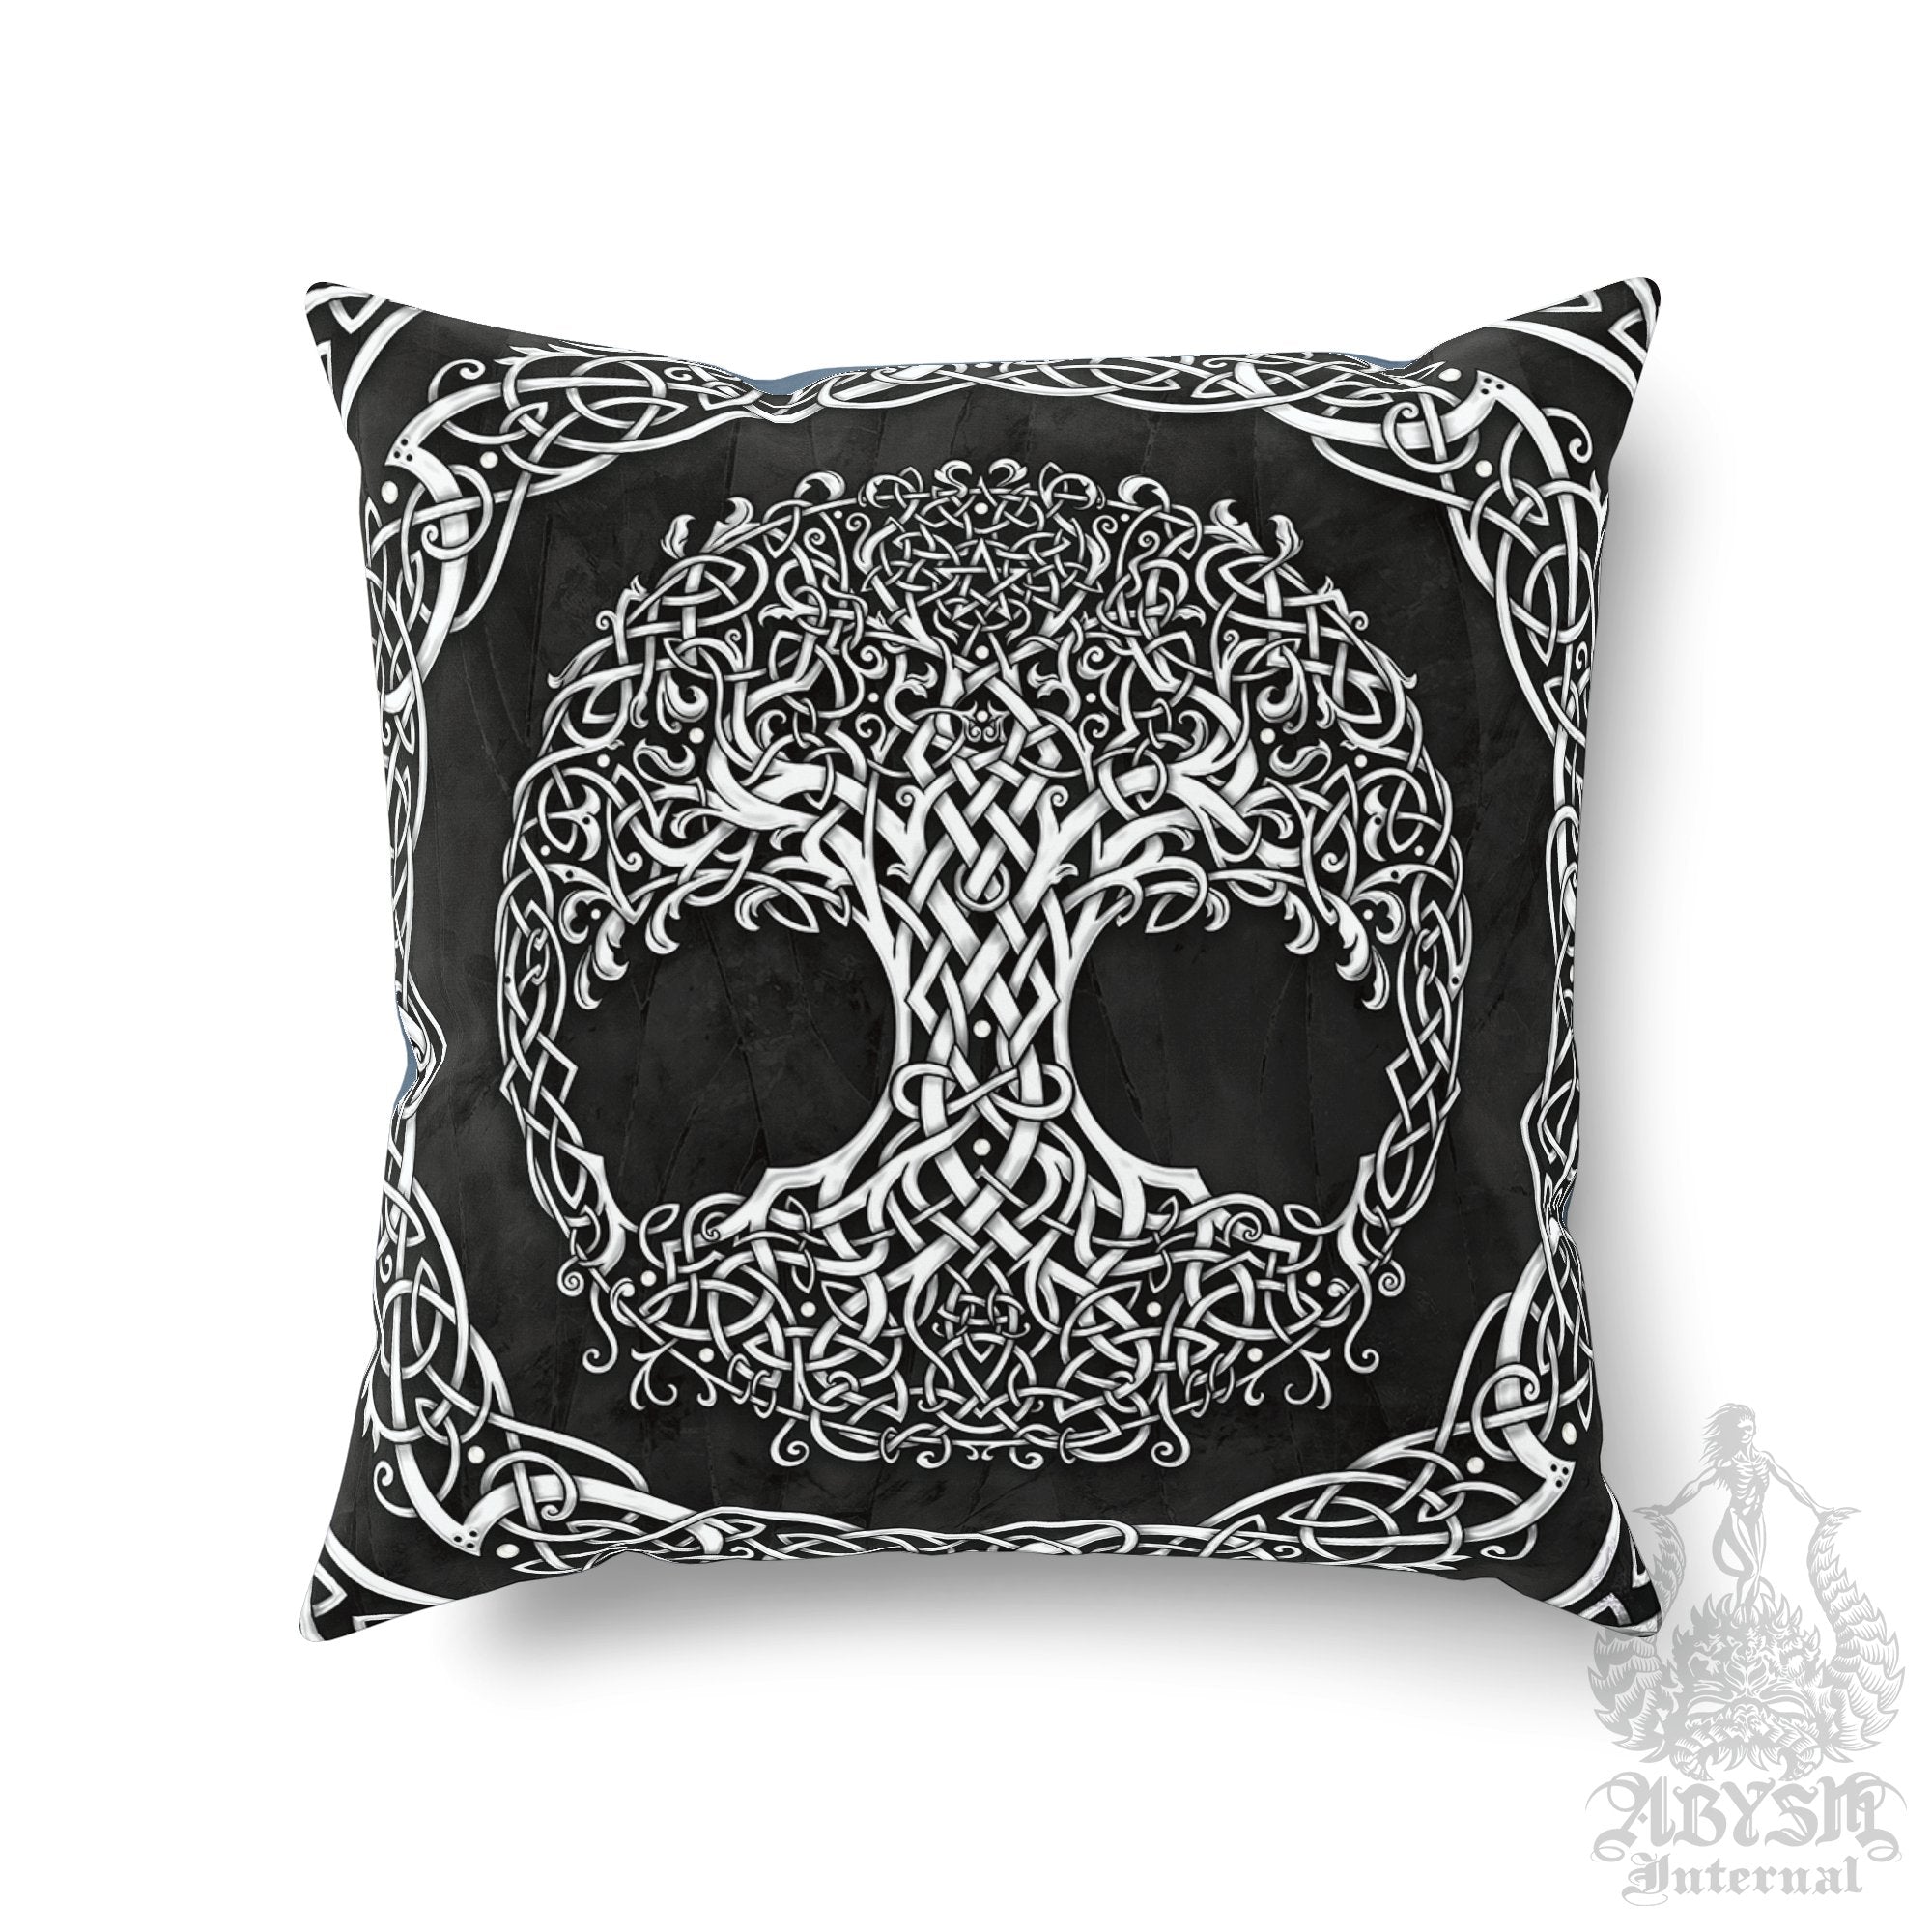 Witch Throw Pillow, Decorative Accent Pillow, Square Cushion Cover, Tree of Life, Wicca Room Decor, Witchy Cetlic Art, Funky Home - White & 3 Colors - Abysm Internal